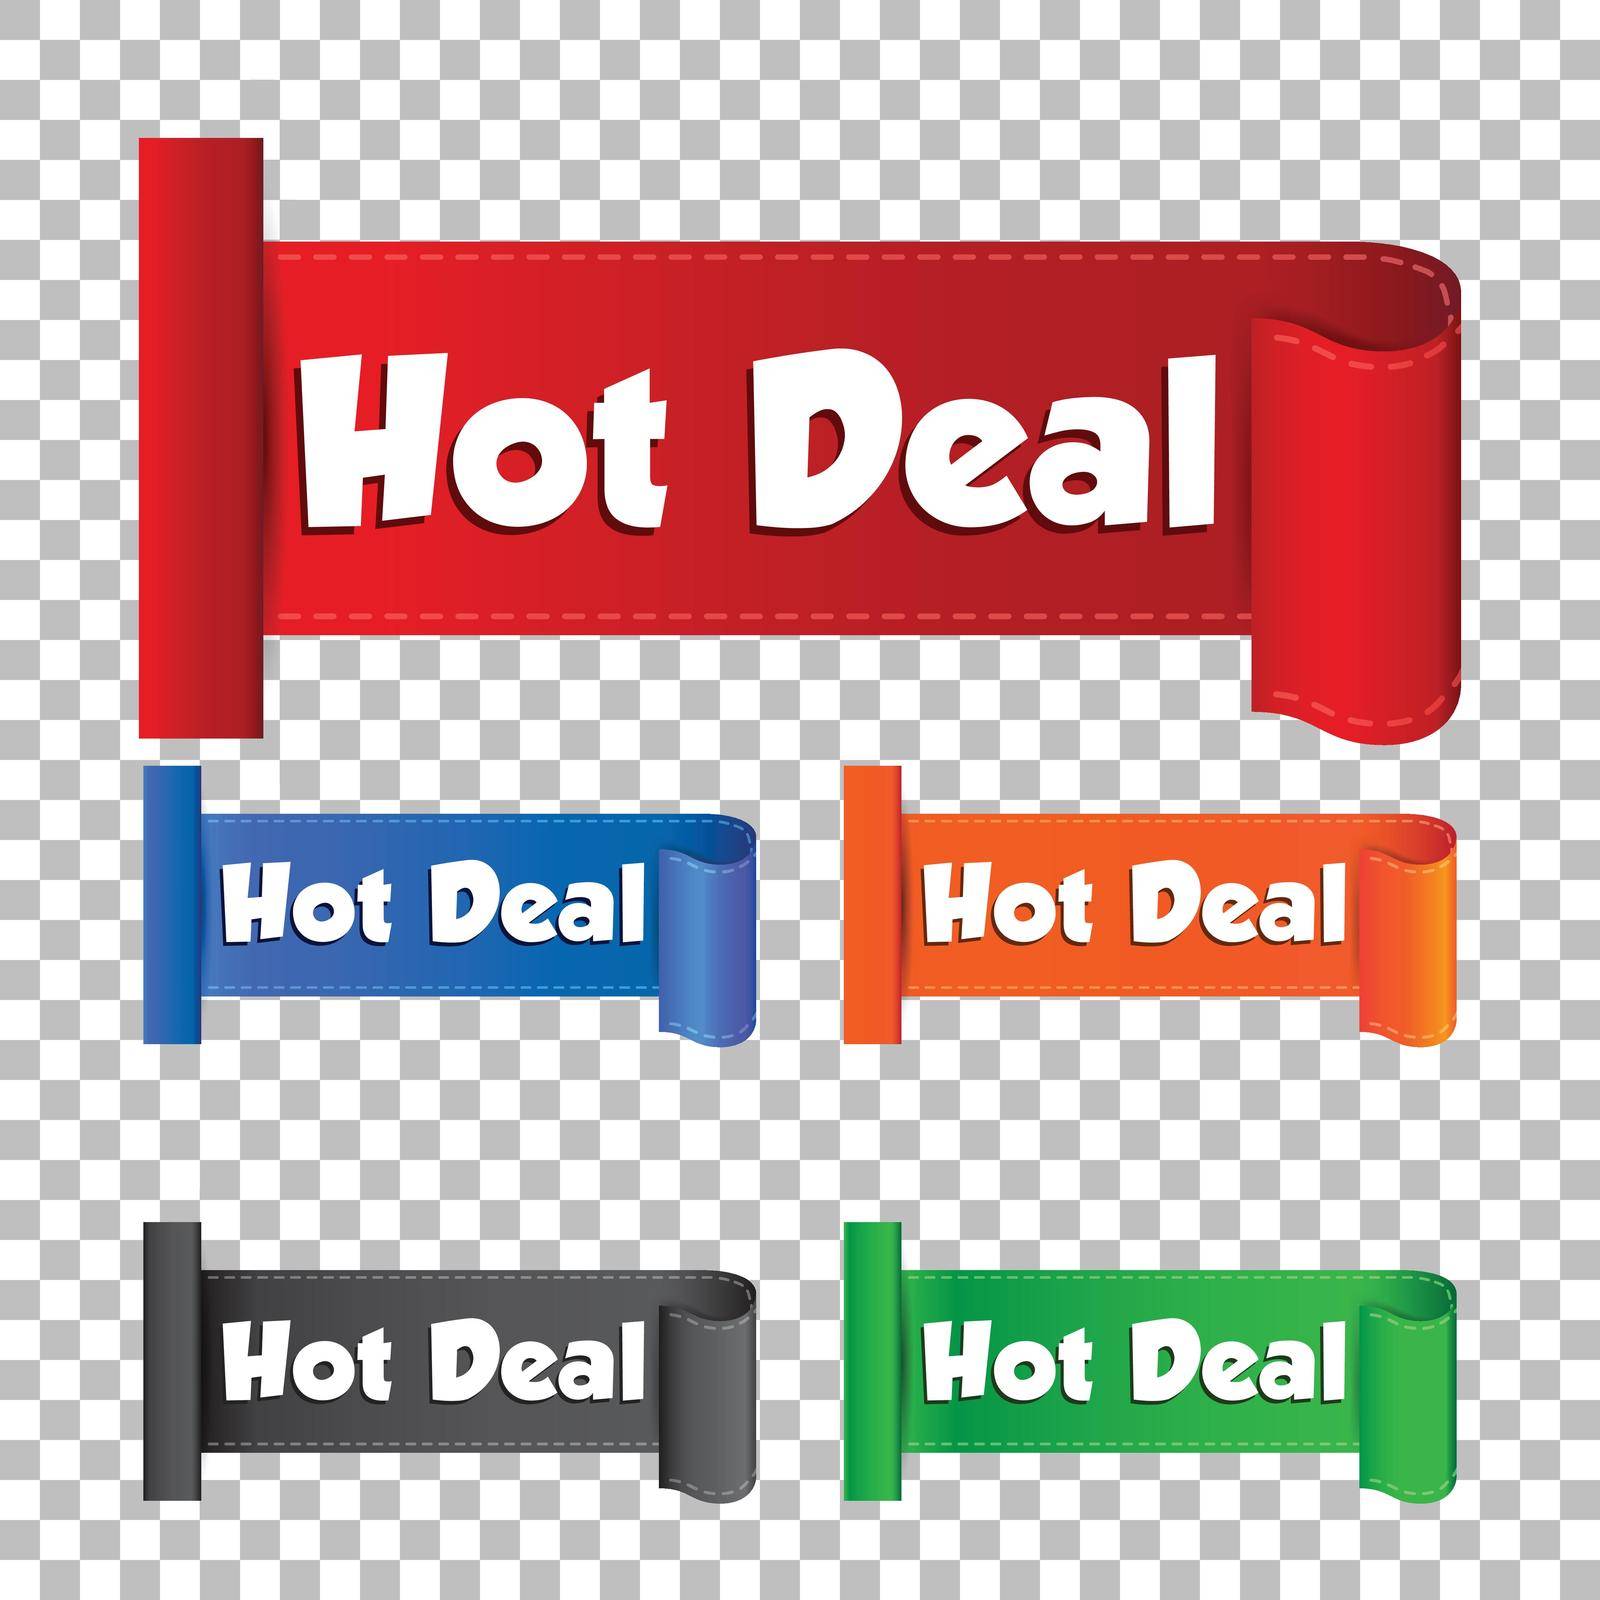 Hot deal sticker. Label vector illustration on isolated background by LysenkoA